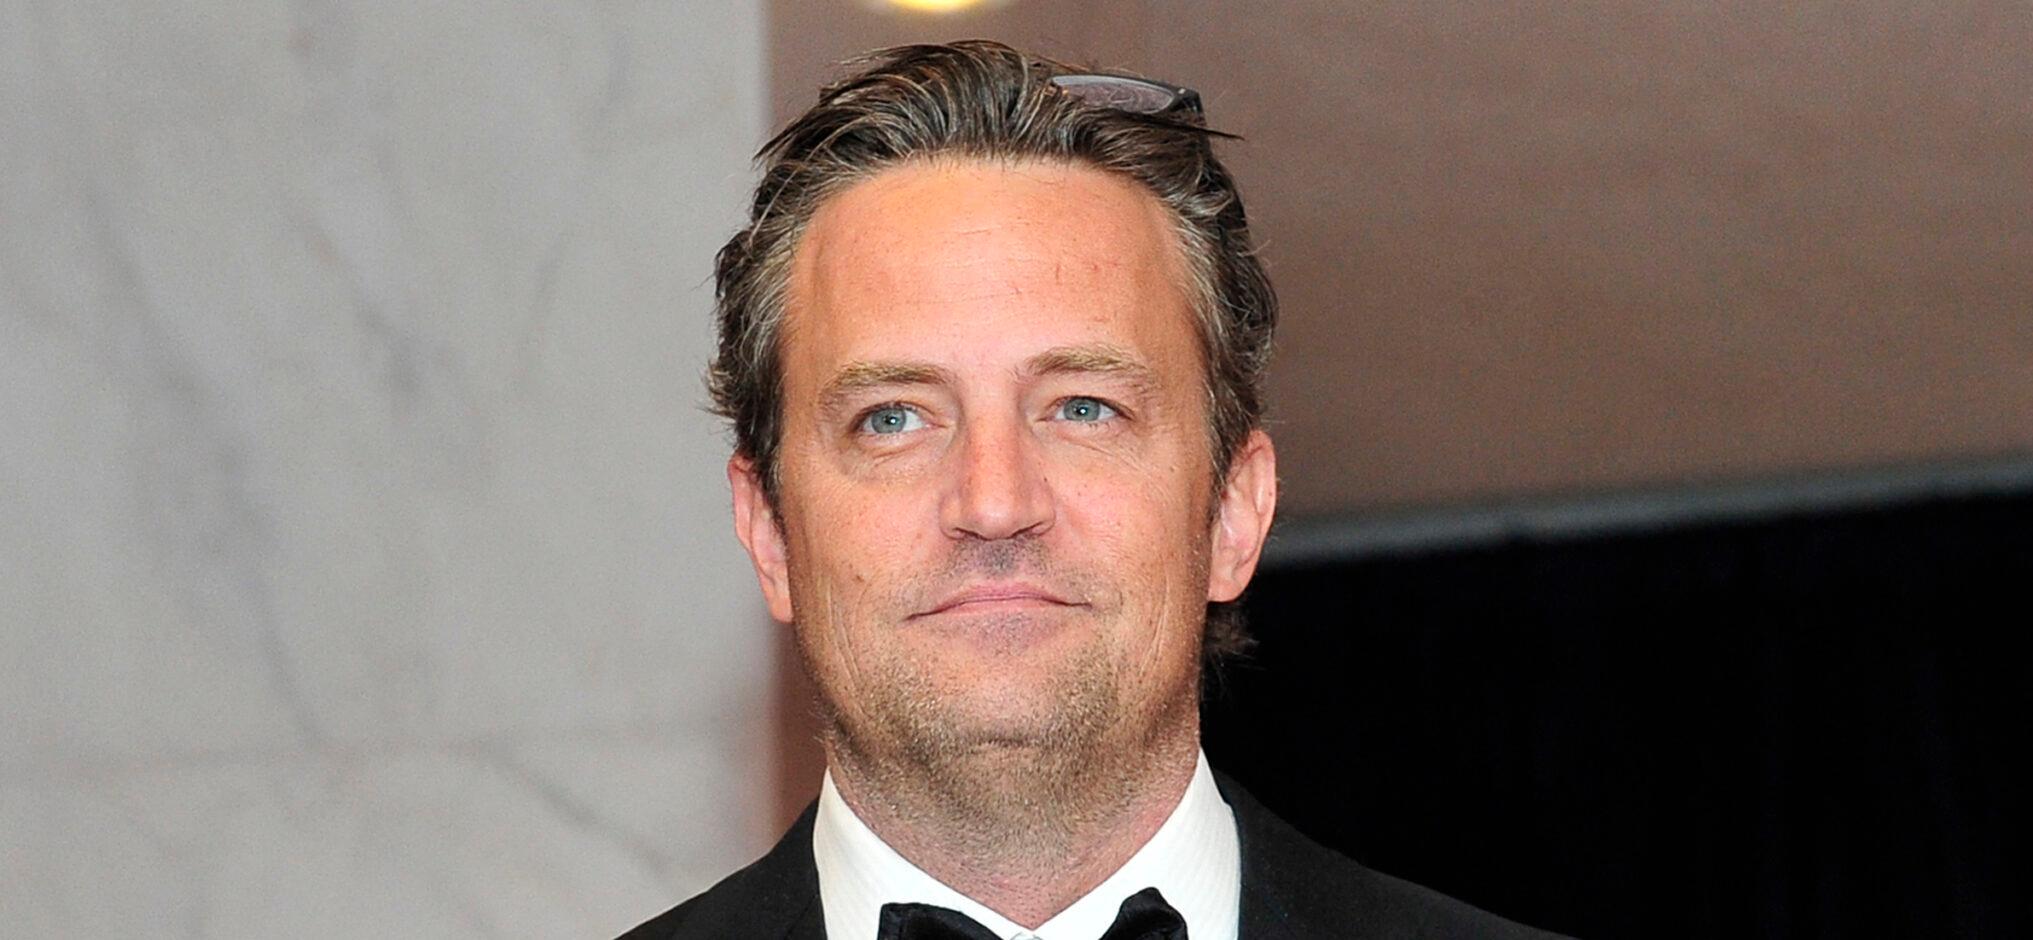 Matthew Perry’s Autopsy Report Details Into A ‘Suicide’ Investigation